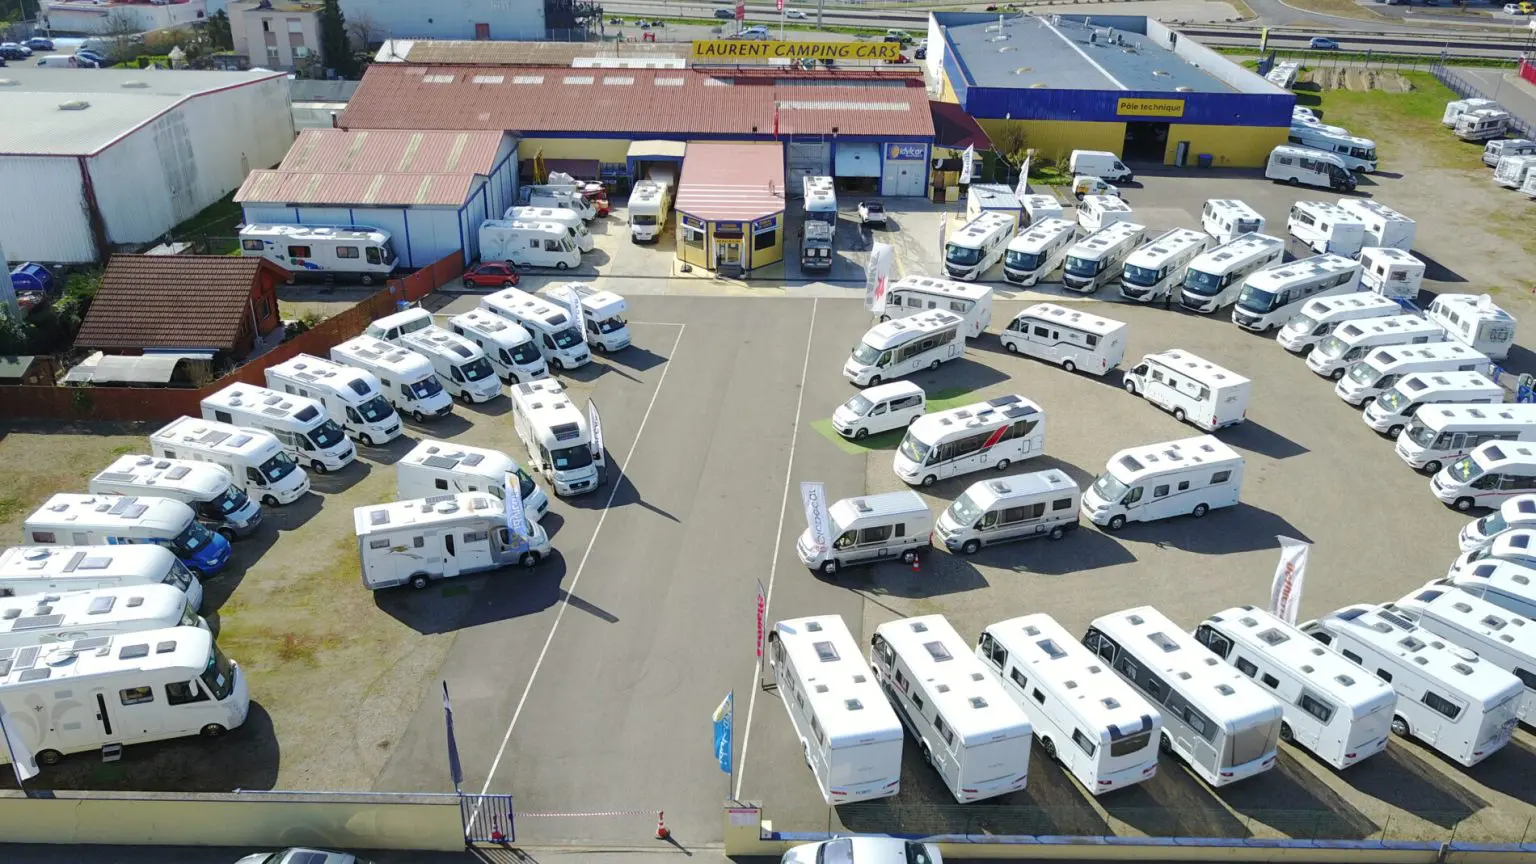 Laurent Camping Cars Strasbourg - Vente Neufs & Occasions